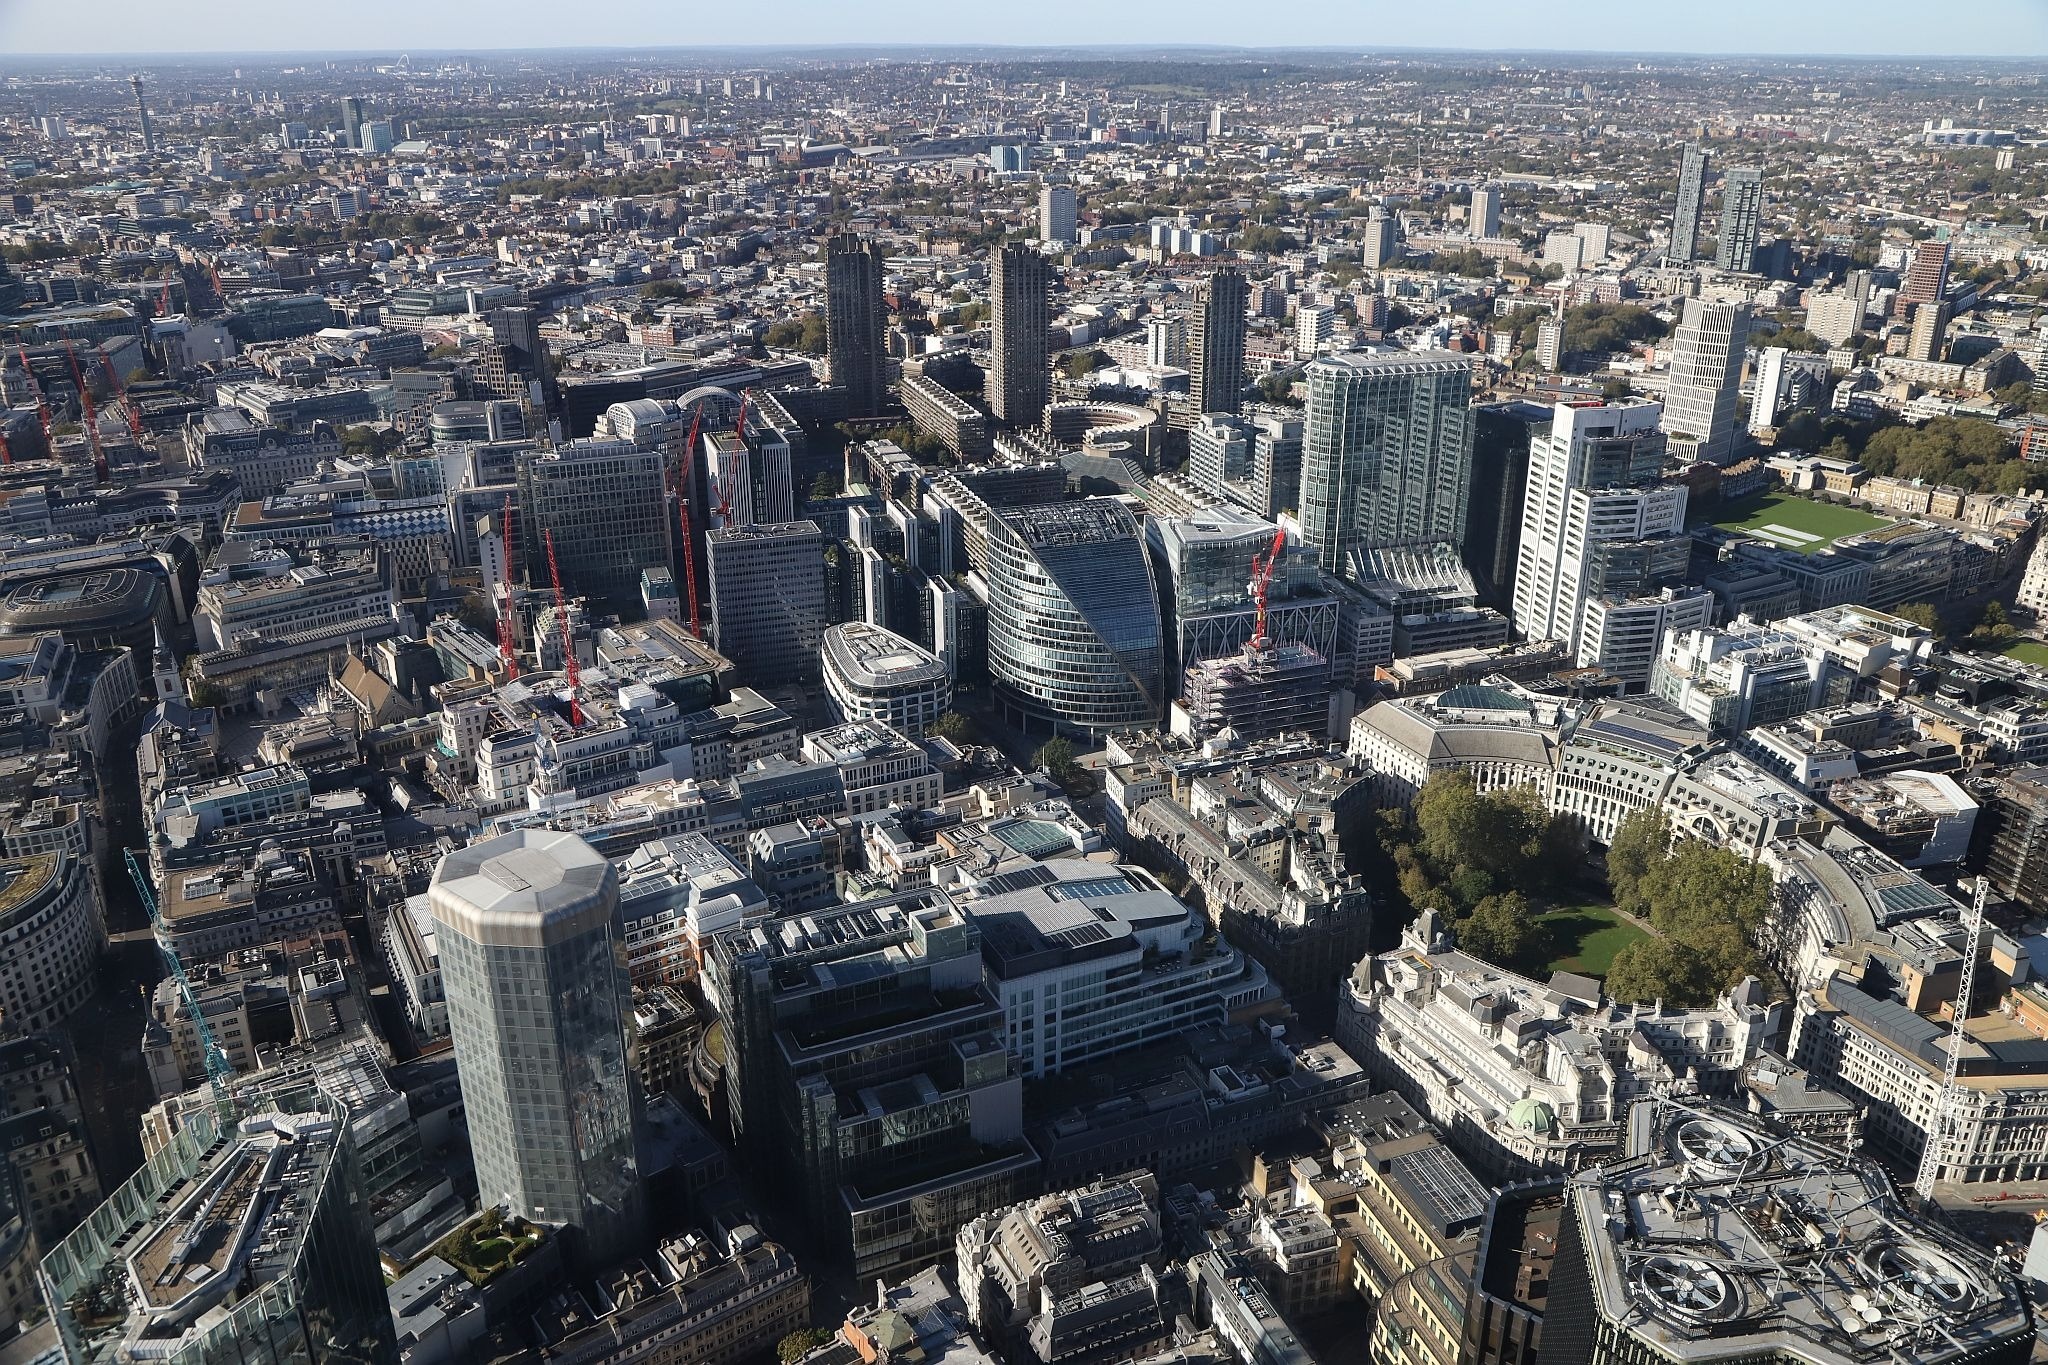 Aerial view of the City of London. View from the Horizon observation platform on the 58th floor of 22 Bishopsgate in the City of London. Photo taken on 15-Oct-2023.